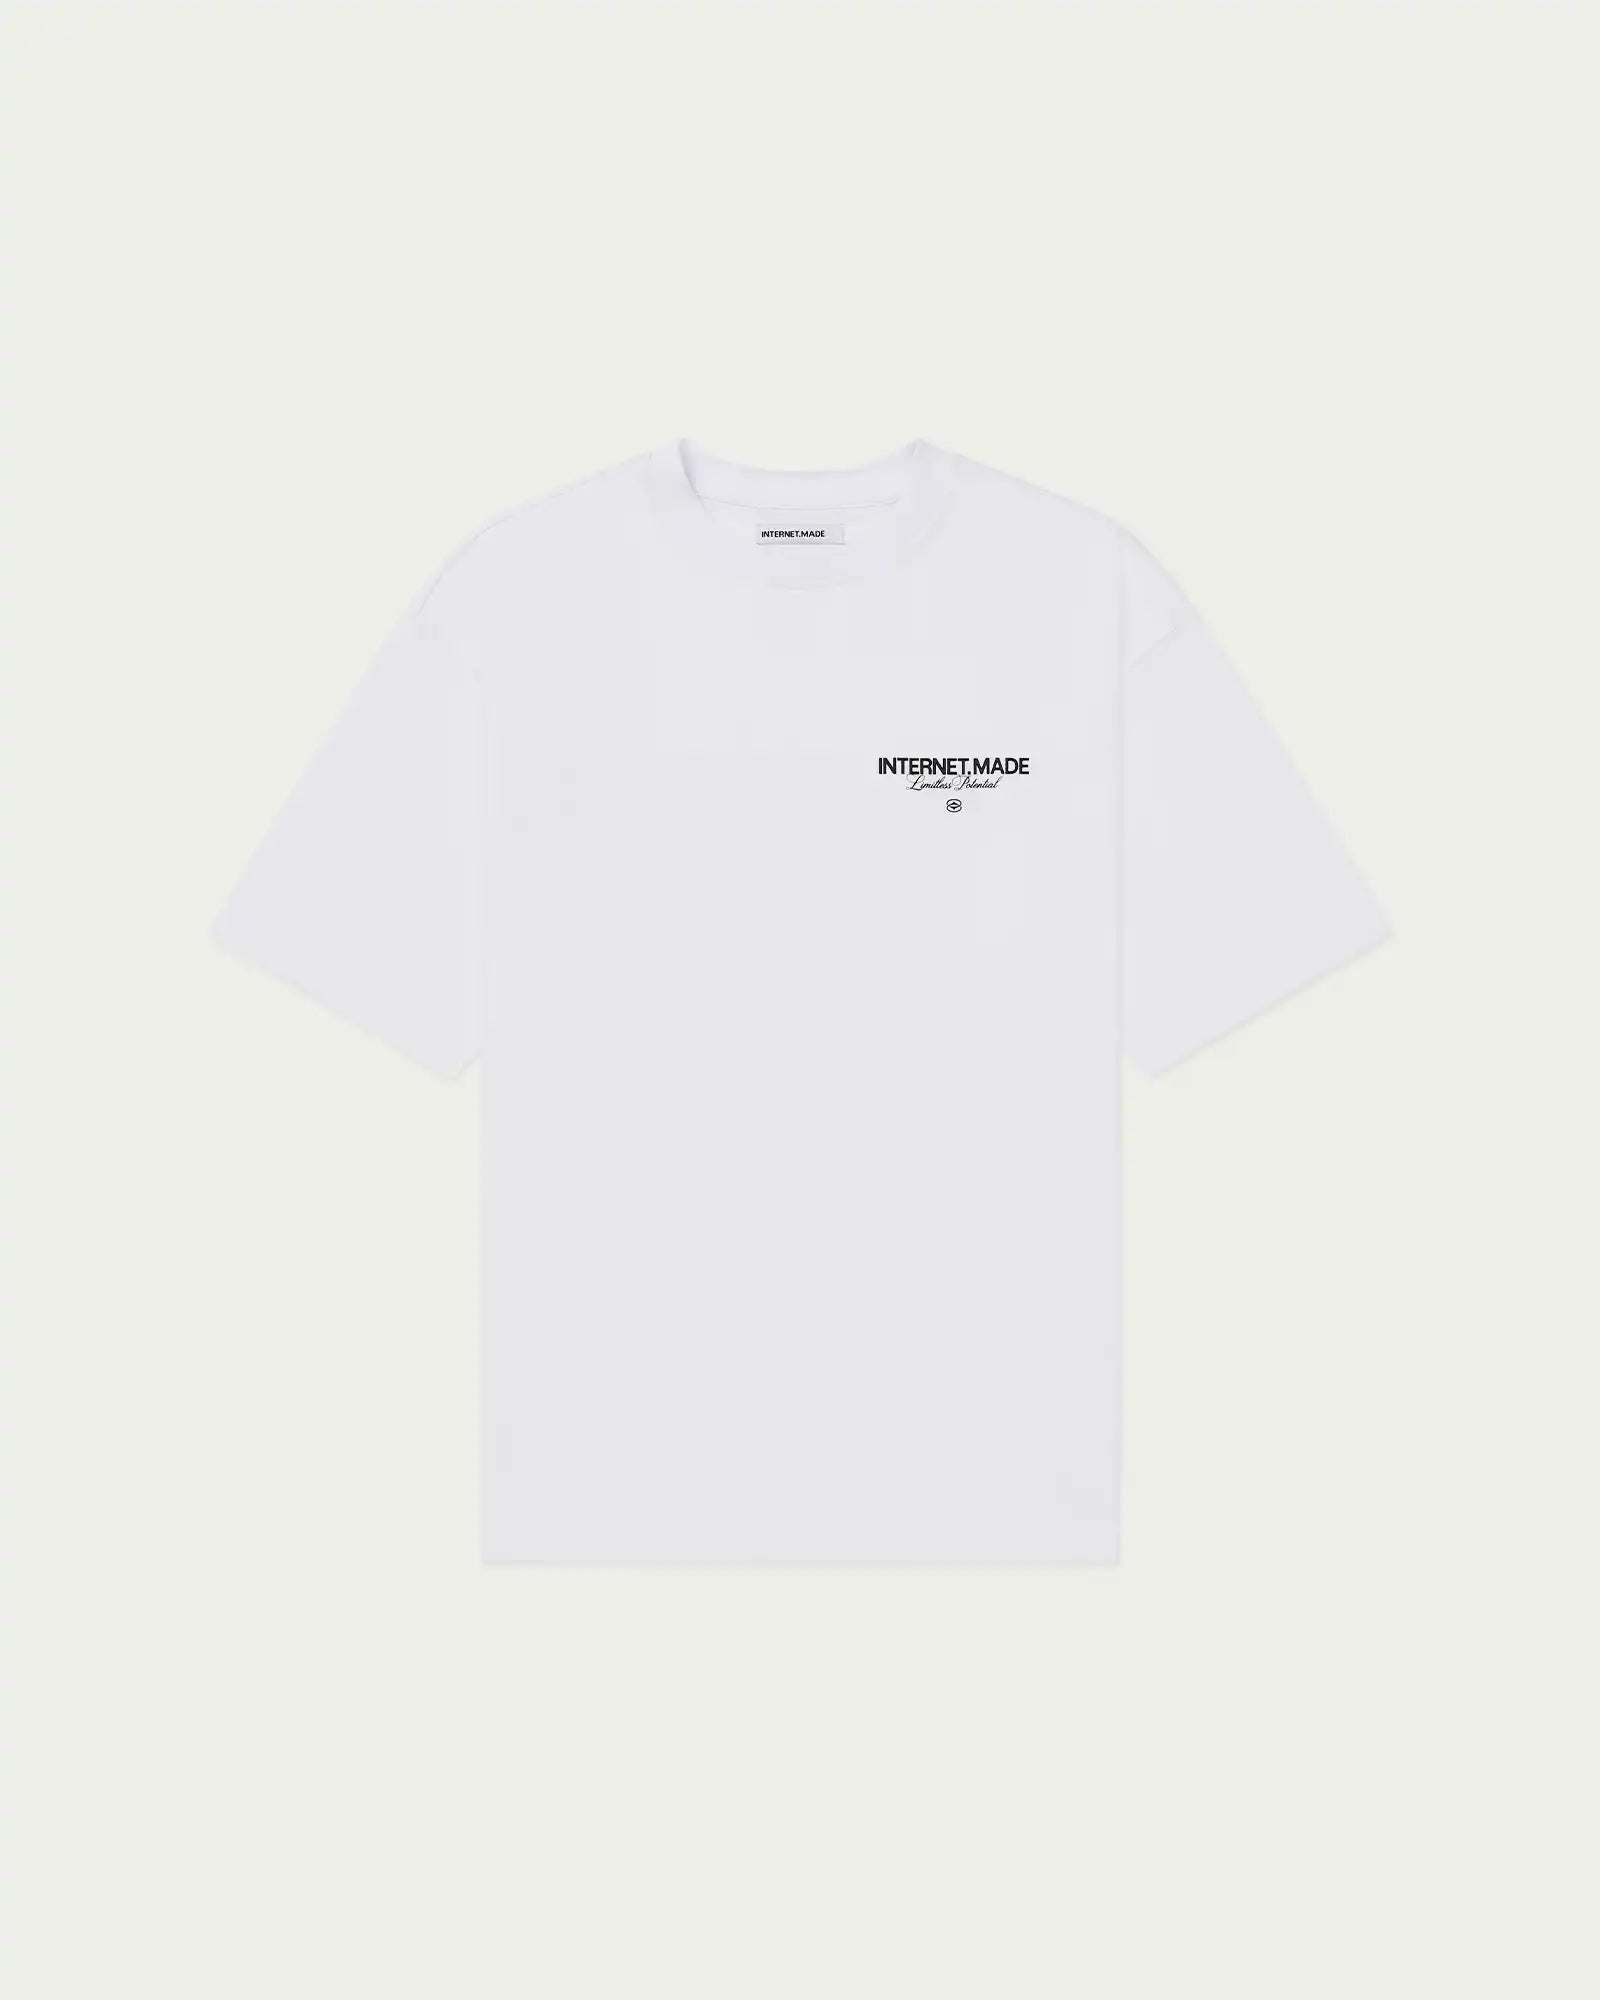 Limitless Potential T-Shirt / White – Internet Made